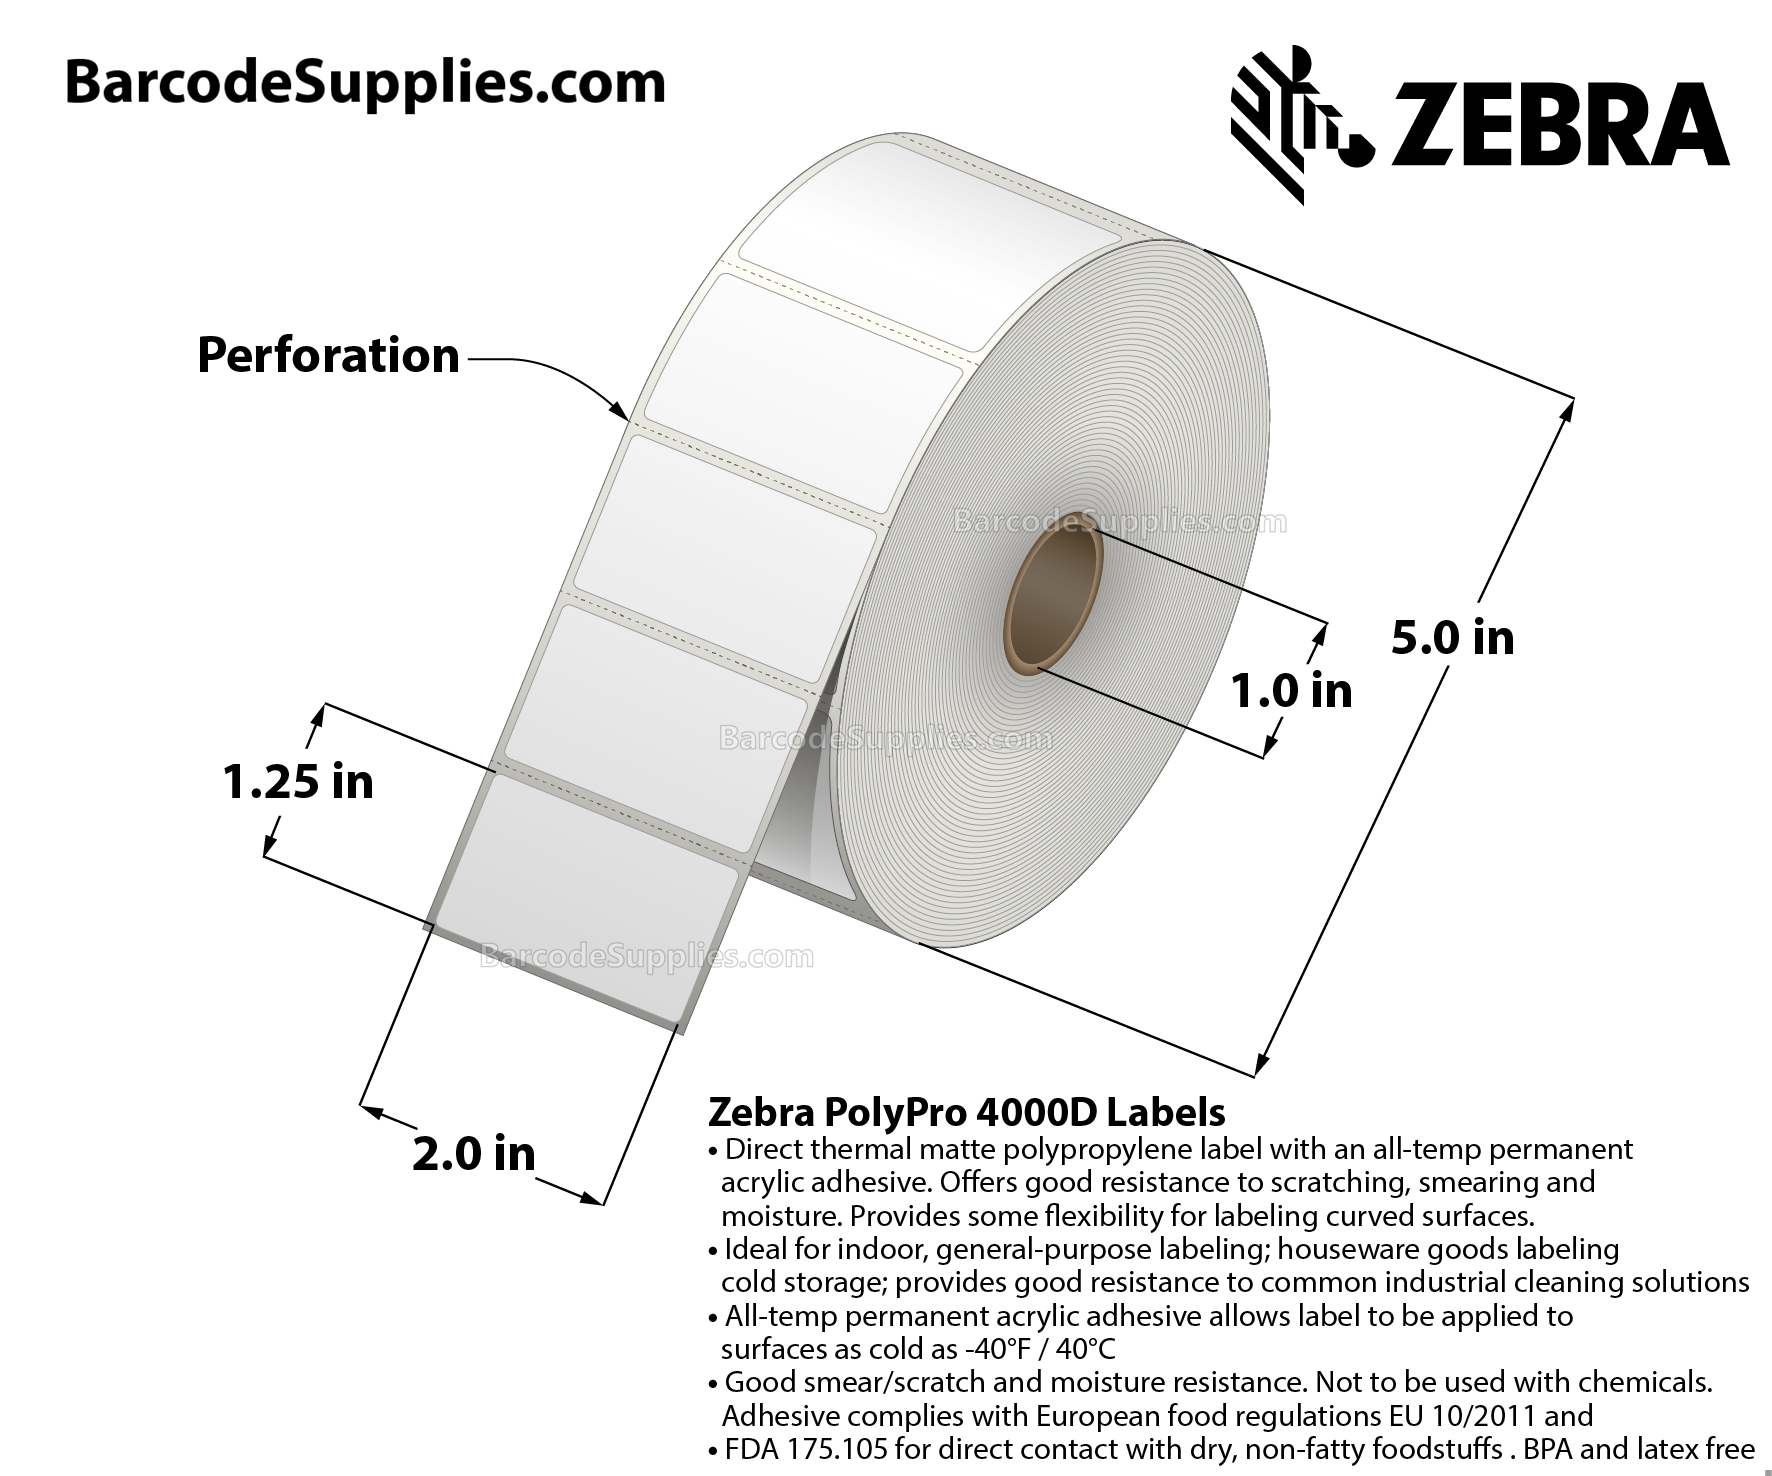 2 x 1.25 Direct Thermal White PolyPro 4000D (with protective overvarnish) Labels With All-Temp Adhesive - Perforated - 2189 Labels Per Roll - Carton Of 8 Rolls - 17512 Labels Total - MPN: 10028821